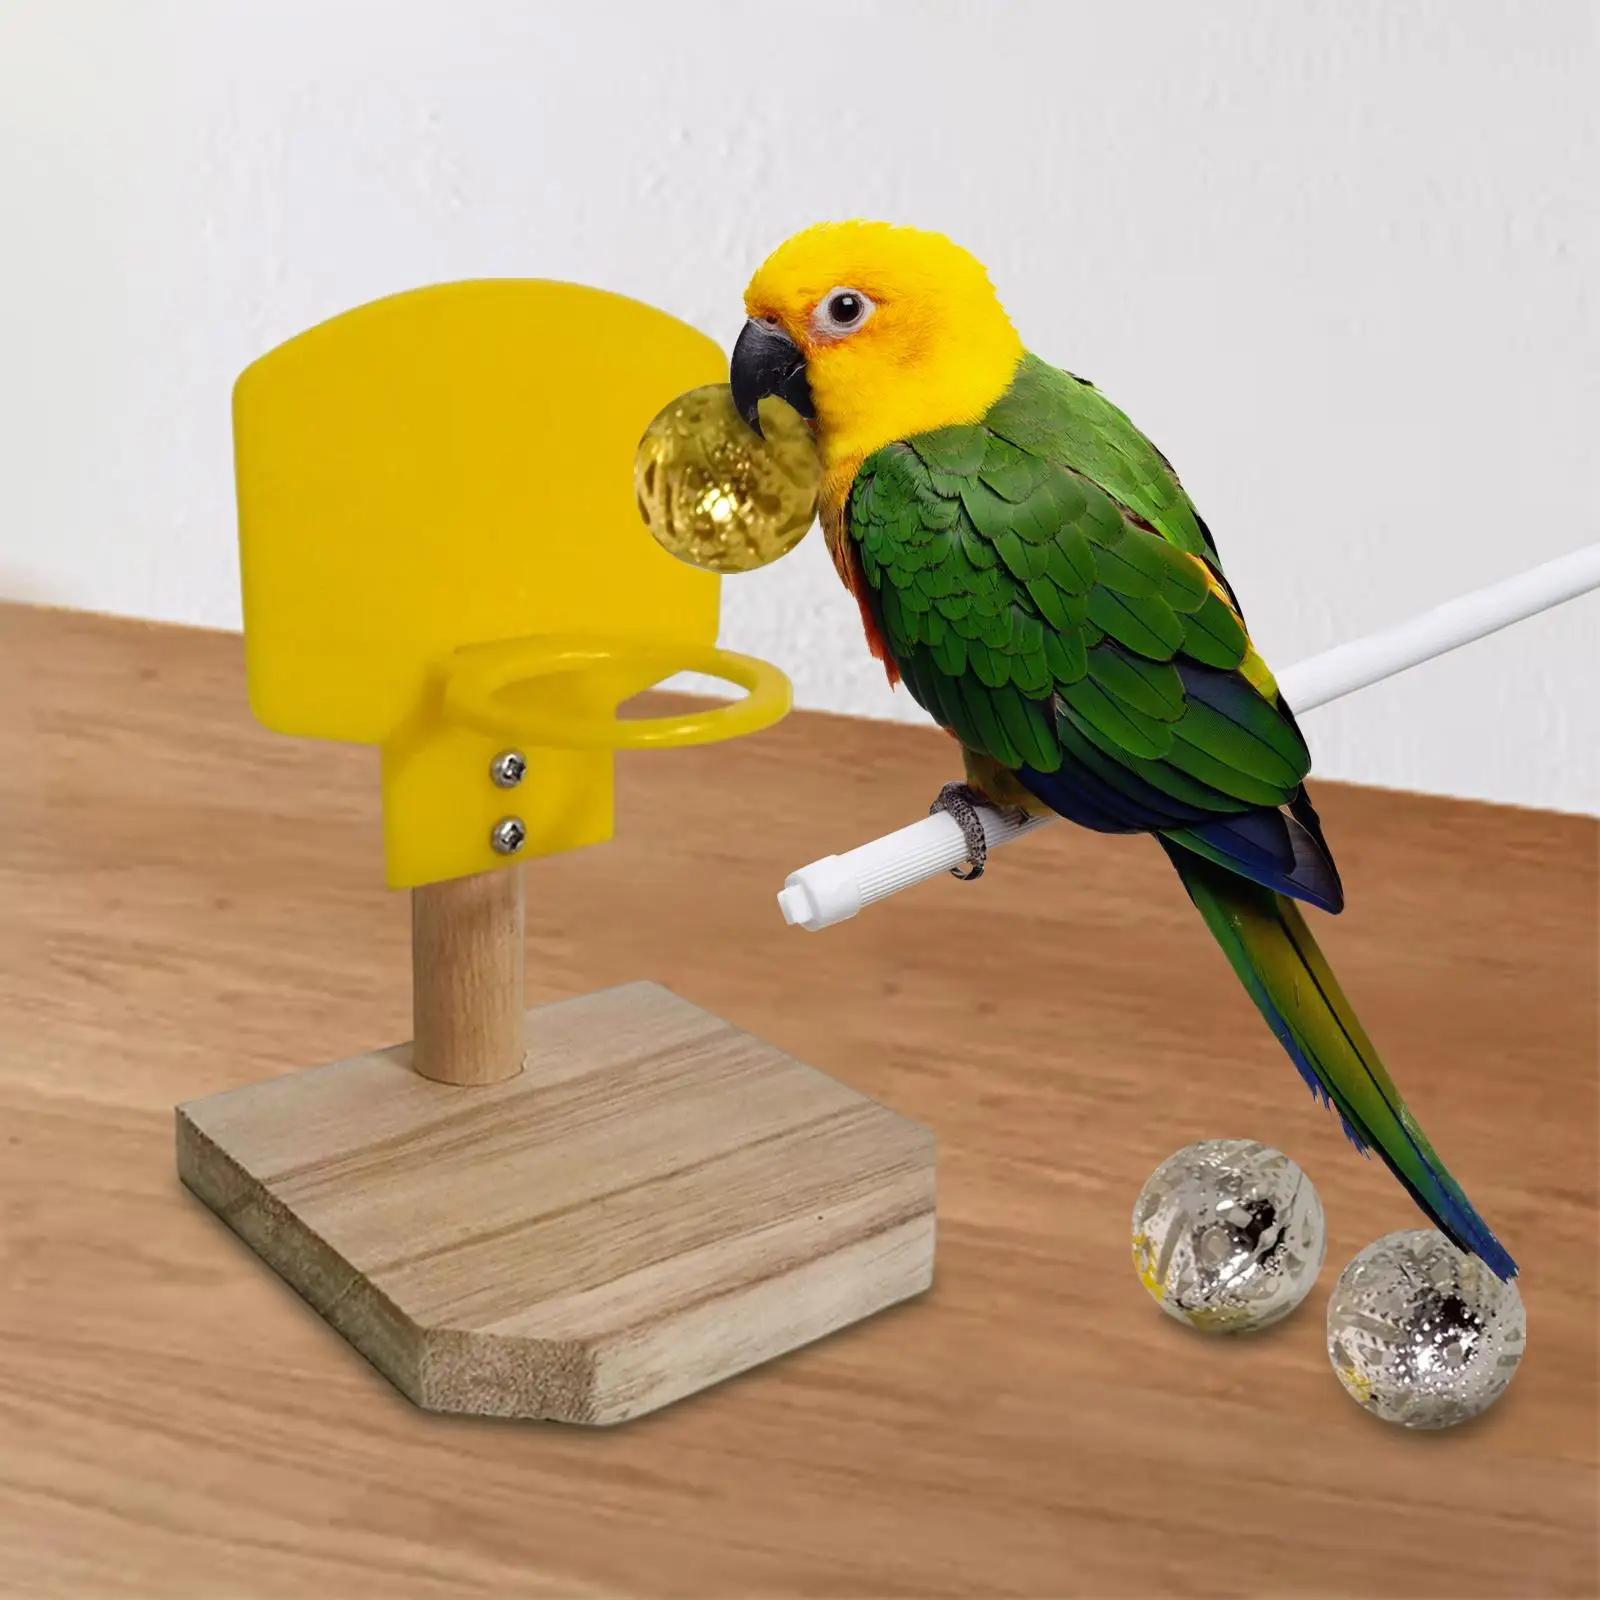 Wooden Bird Toys Basketball Training Parrot Intelligence Toy Budgie Funny Birds Parrot Toys